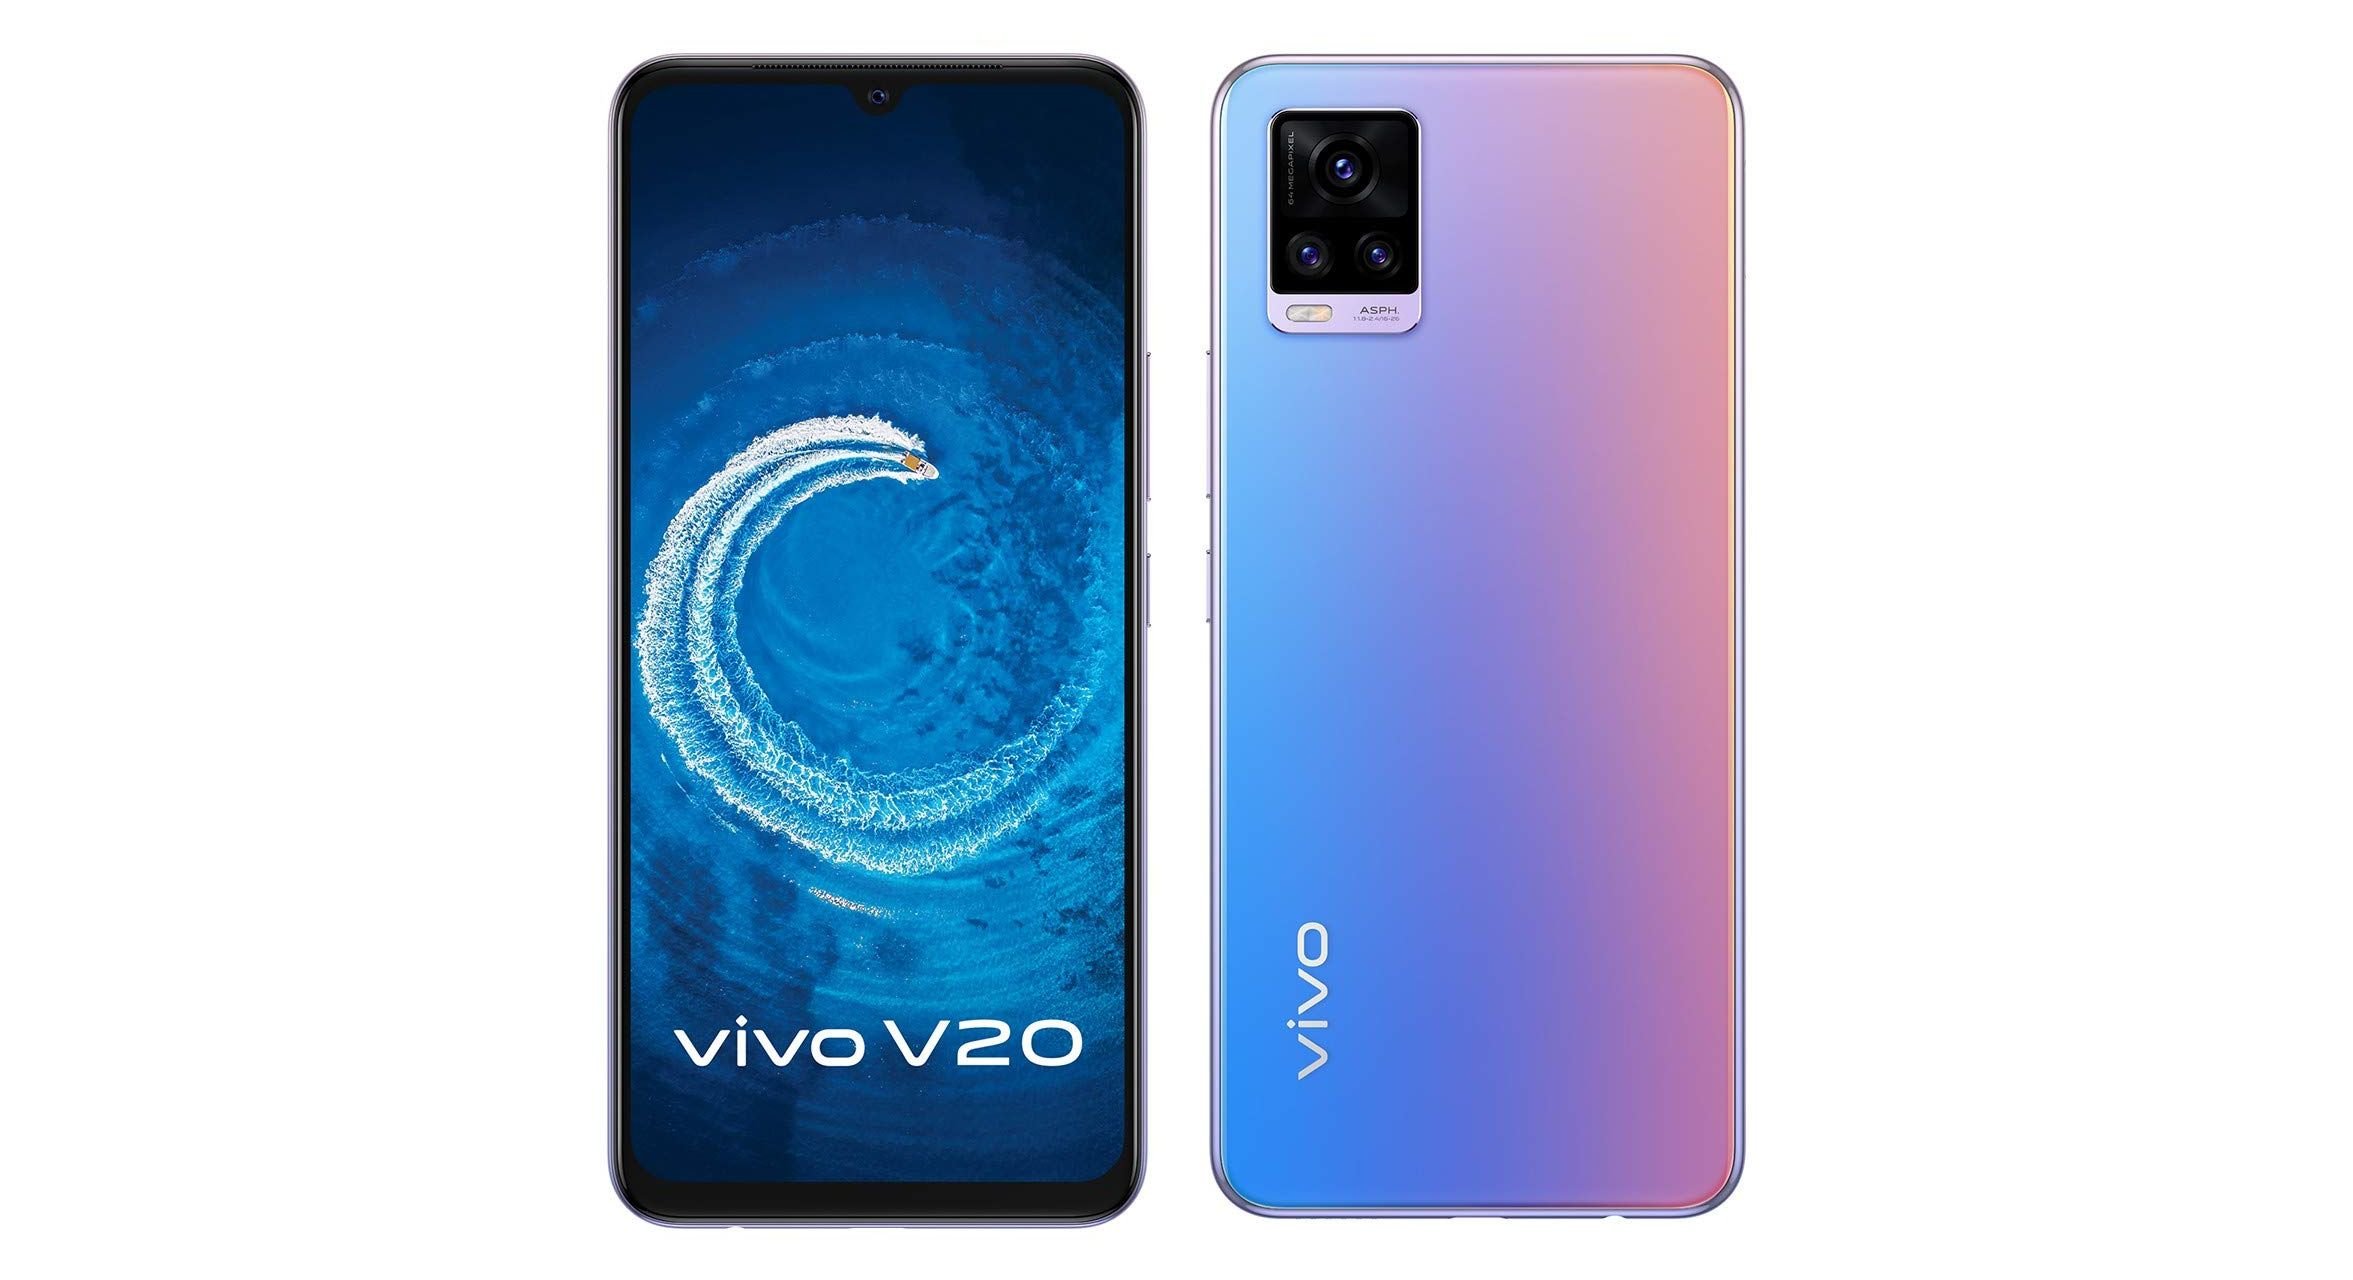 Vivo V20 (2021) silently launched with Snapdragon 730G, 44MP selfie camera, 64MP triple camera and Android 11 OS in India